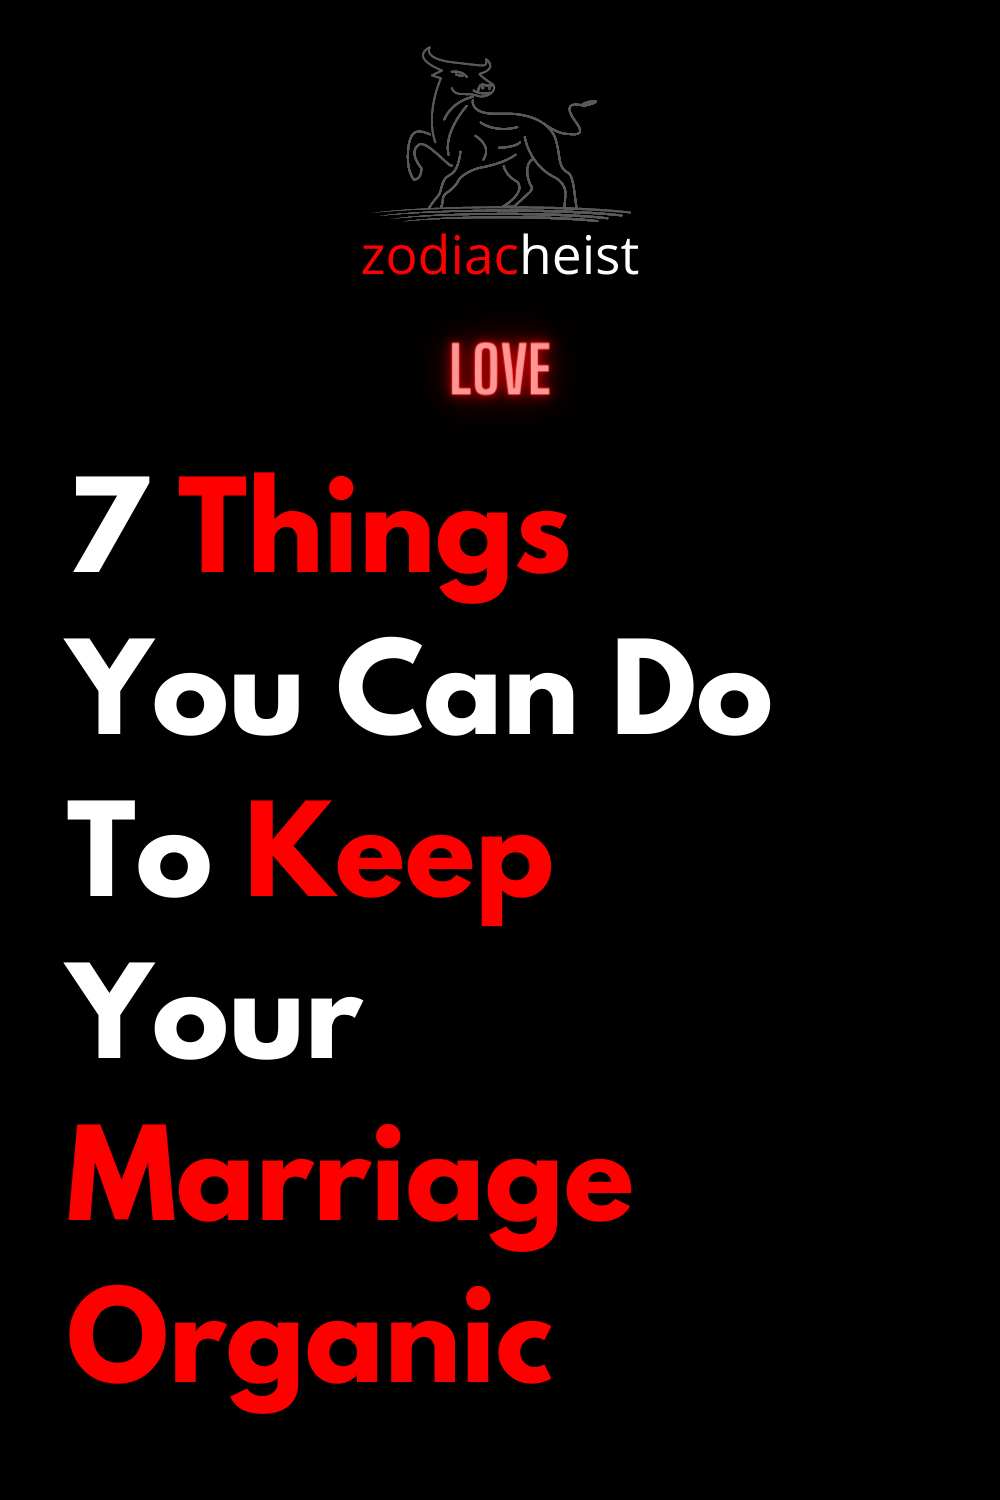 7 Things You Can Do To Keep Your Marriage Organic